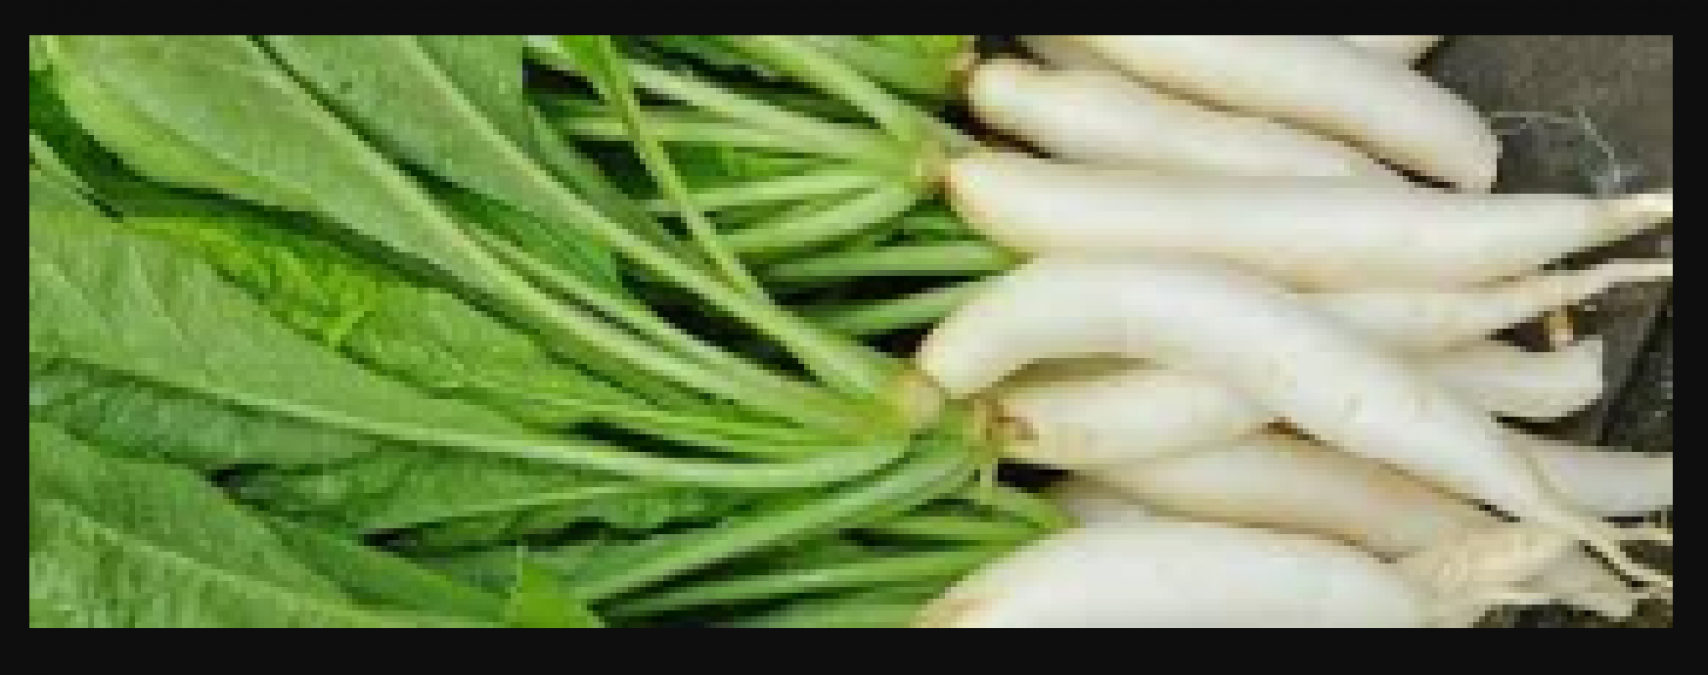 Do not consume these things with radish, harmful for health